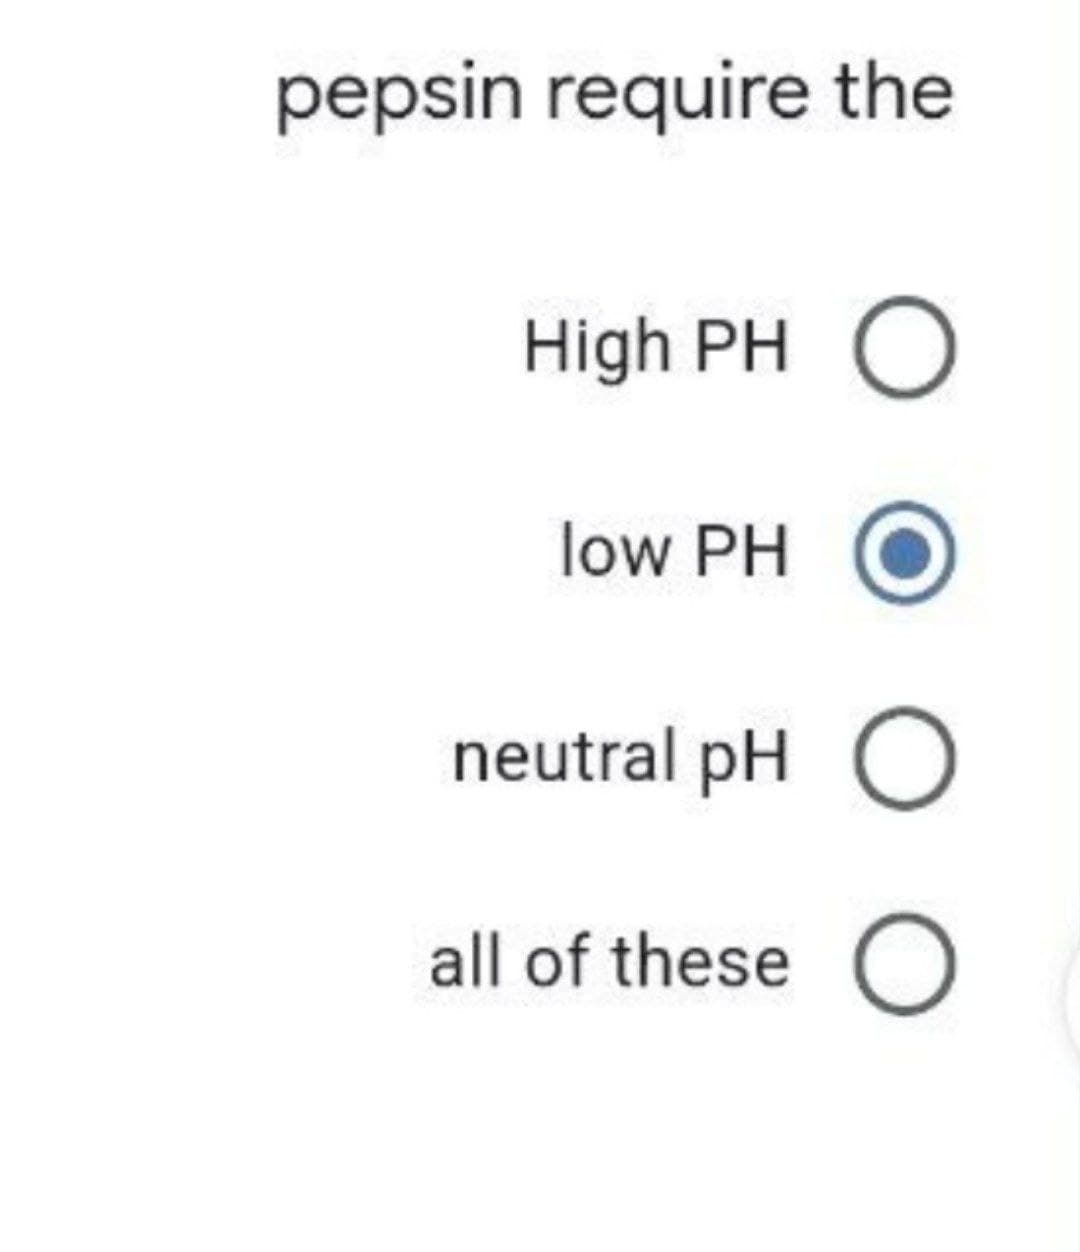 pepsin require the
High PHO
low PH
neutral pH. O
all of these O